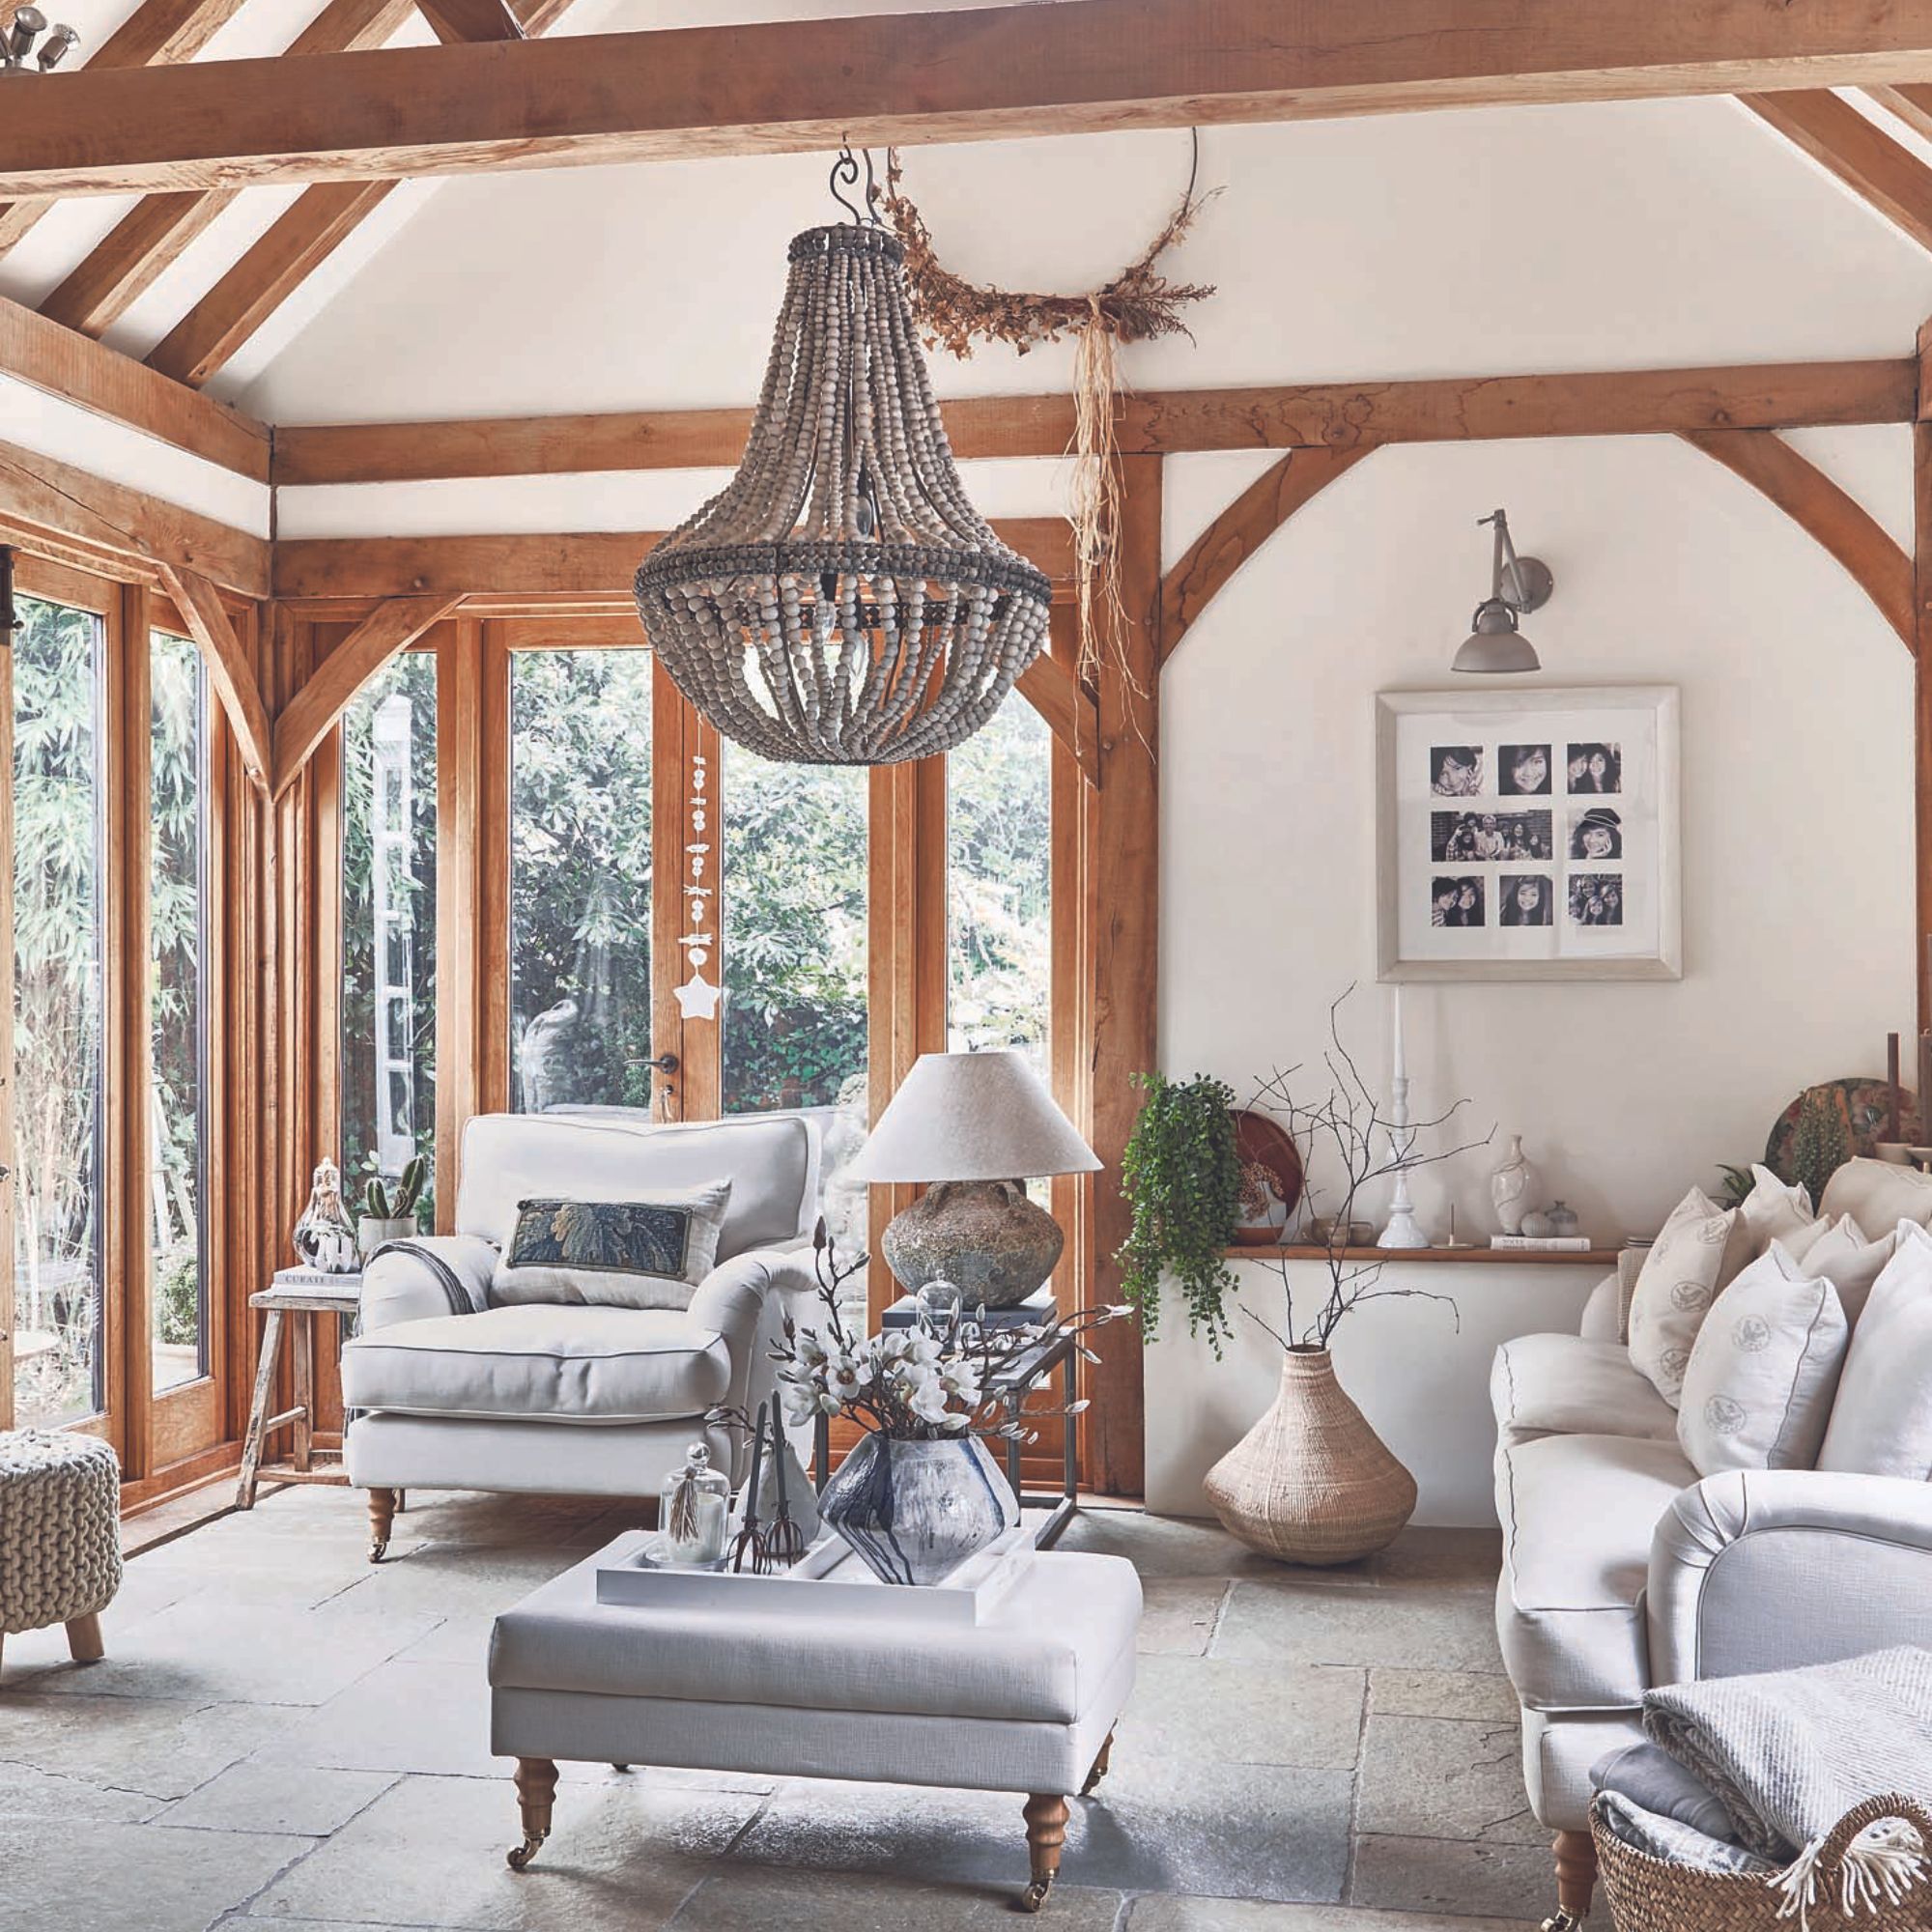 oak framed sunroom with antique beaded pendant light and white sofa and armchair